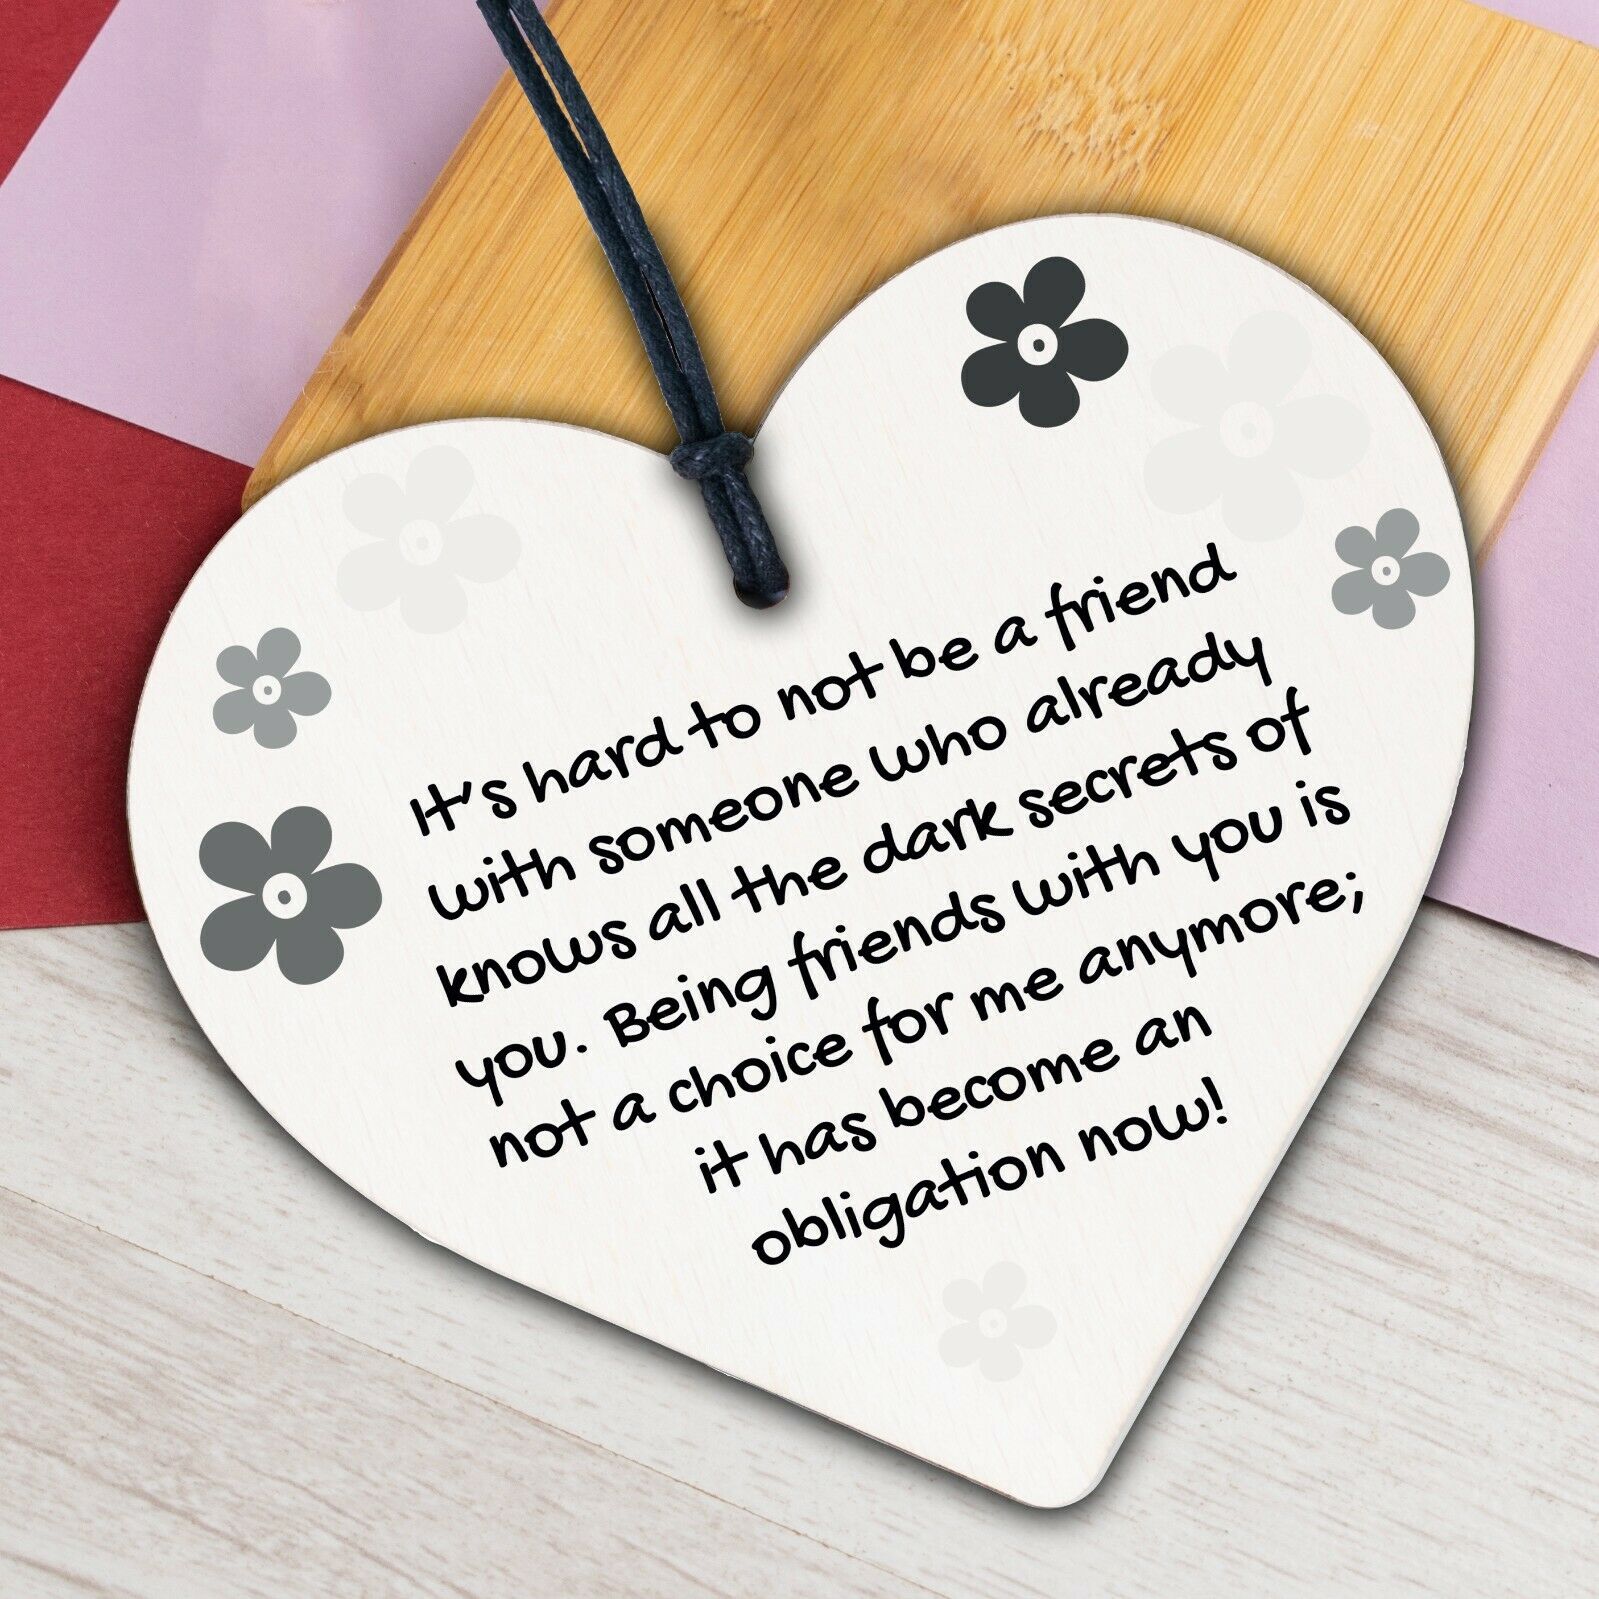 Special Friend Friendship Plaque Shabby Chic Wood Heart Thank You Birthday Gifts